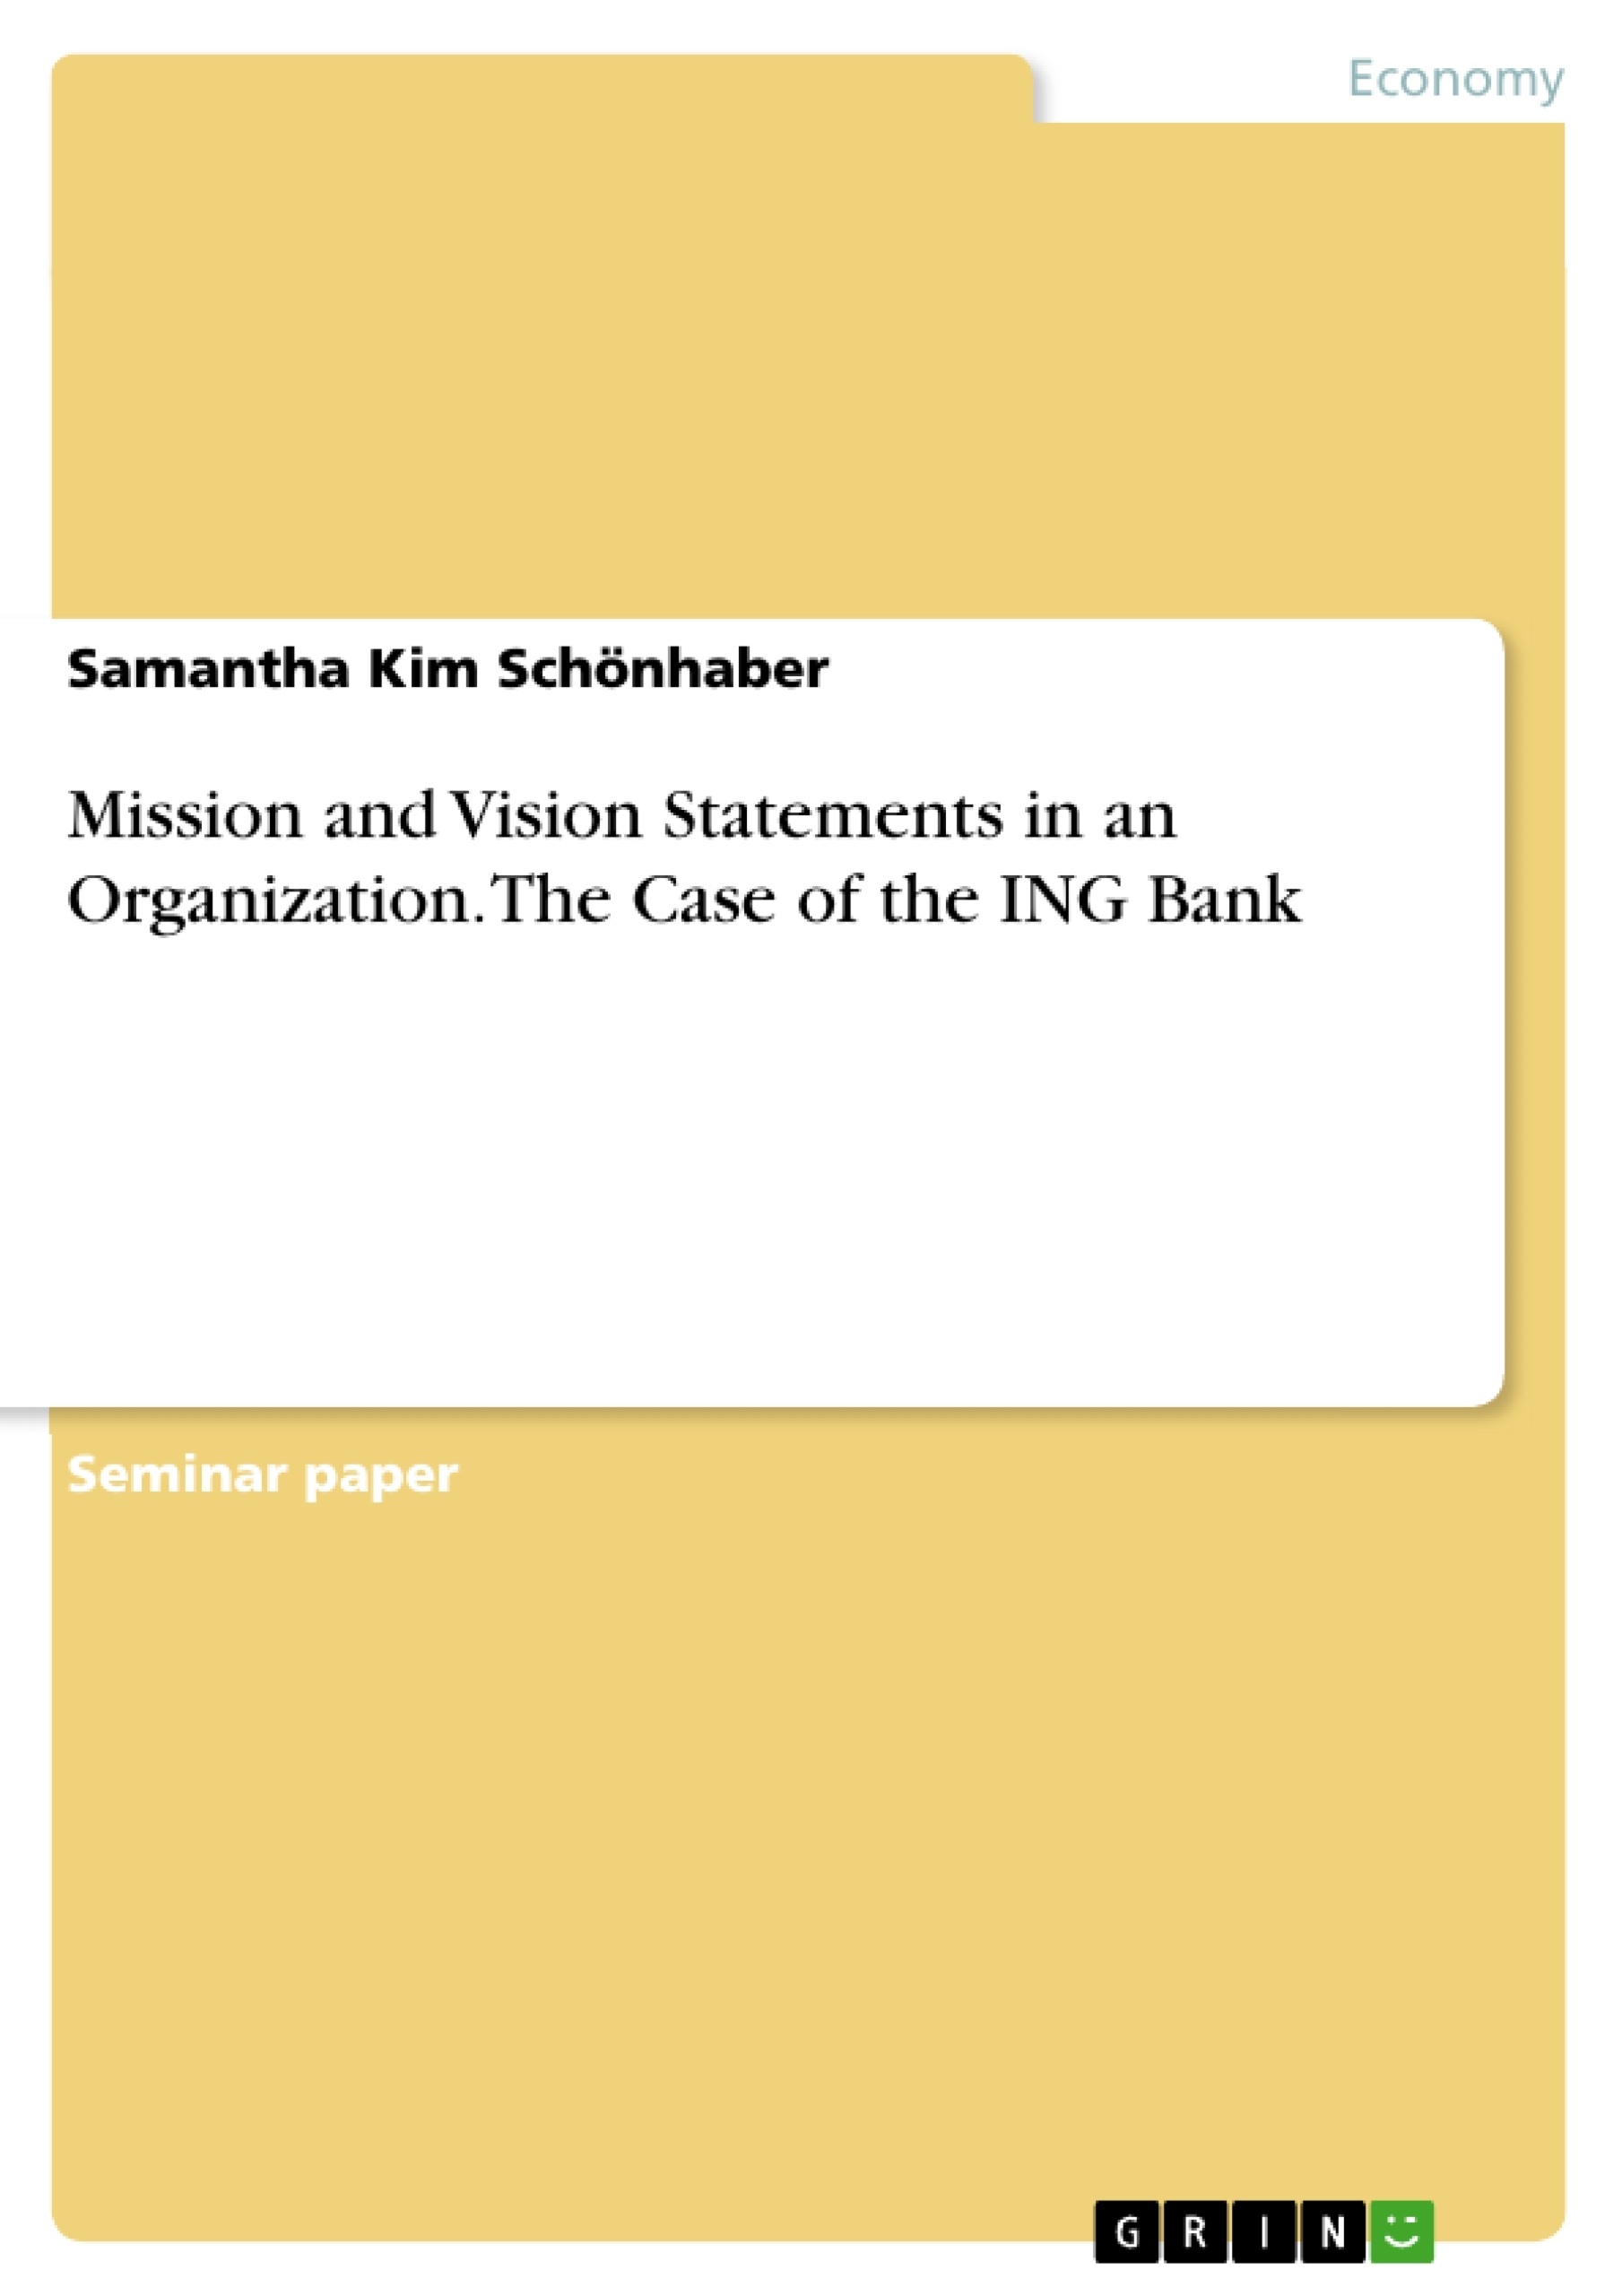 Título: Mission and Vision Statements in an Organization. The Case of the ING Bank